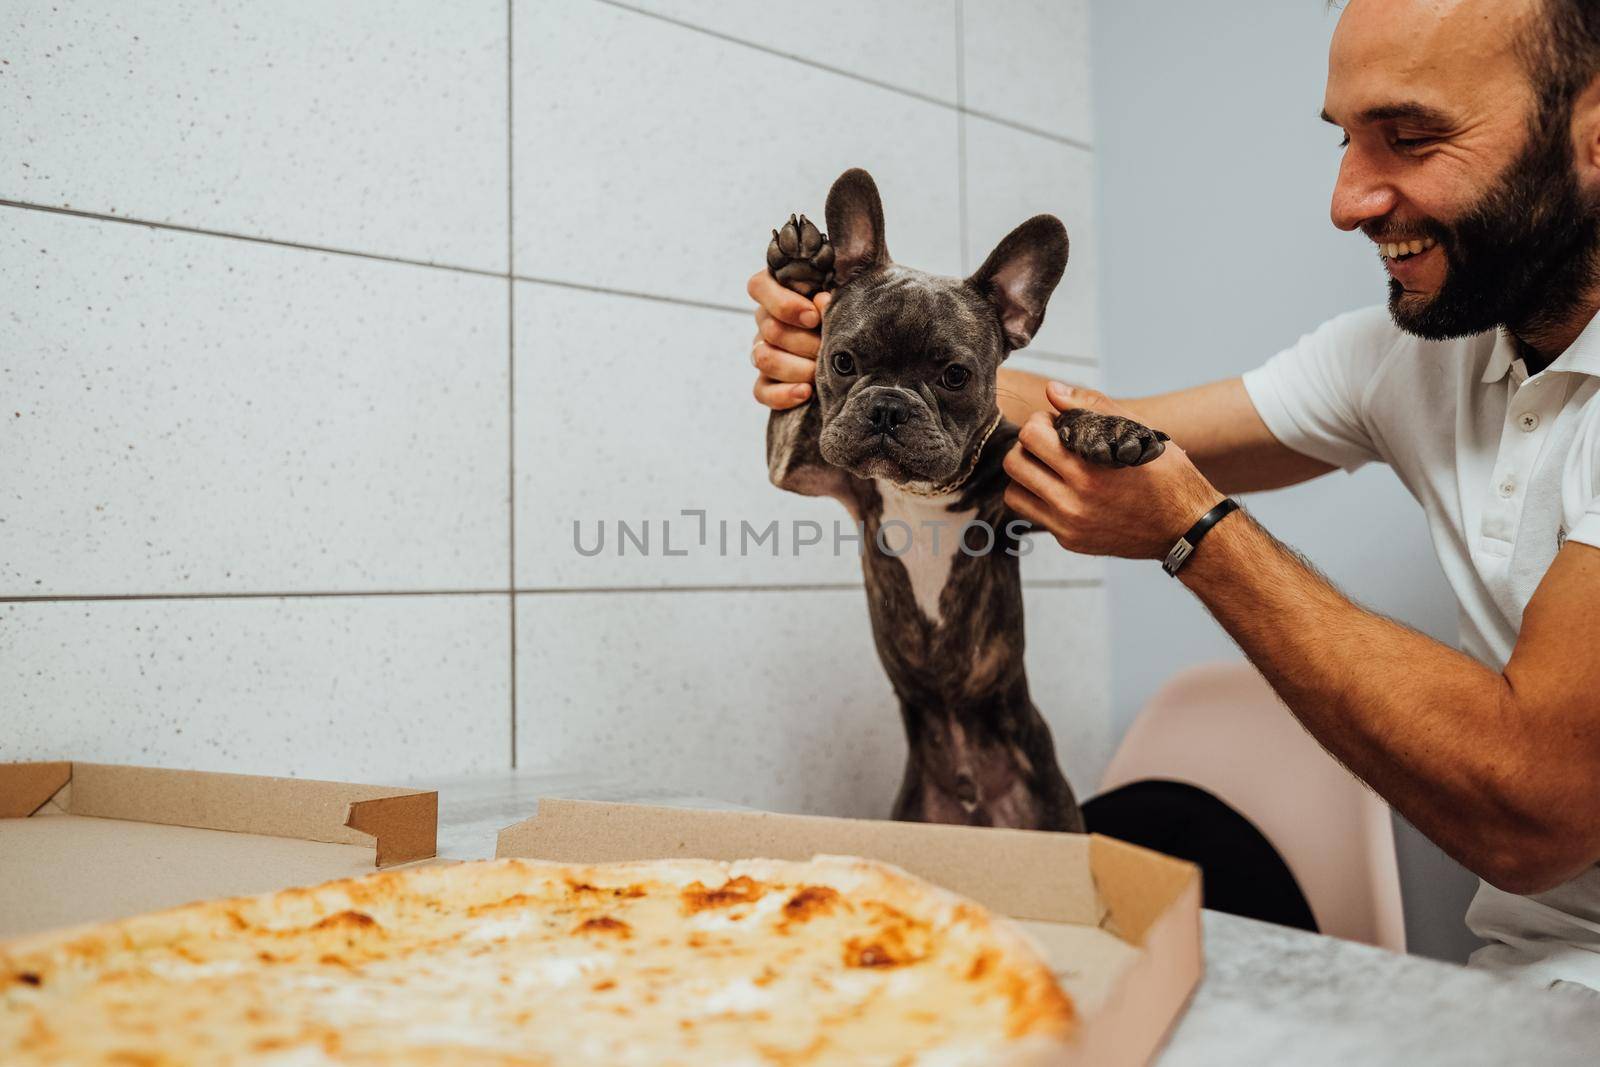 Cheerful Man Holding French Bulldog by Paws in Front of Pizza on Kitchen Desk, Small Dog Impatiently Waiting for Human Food